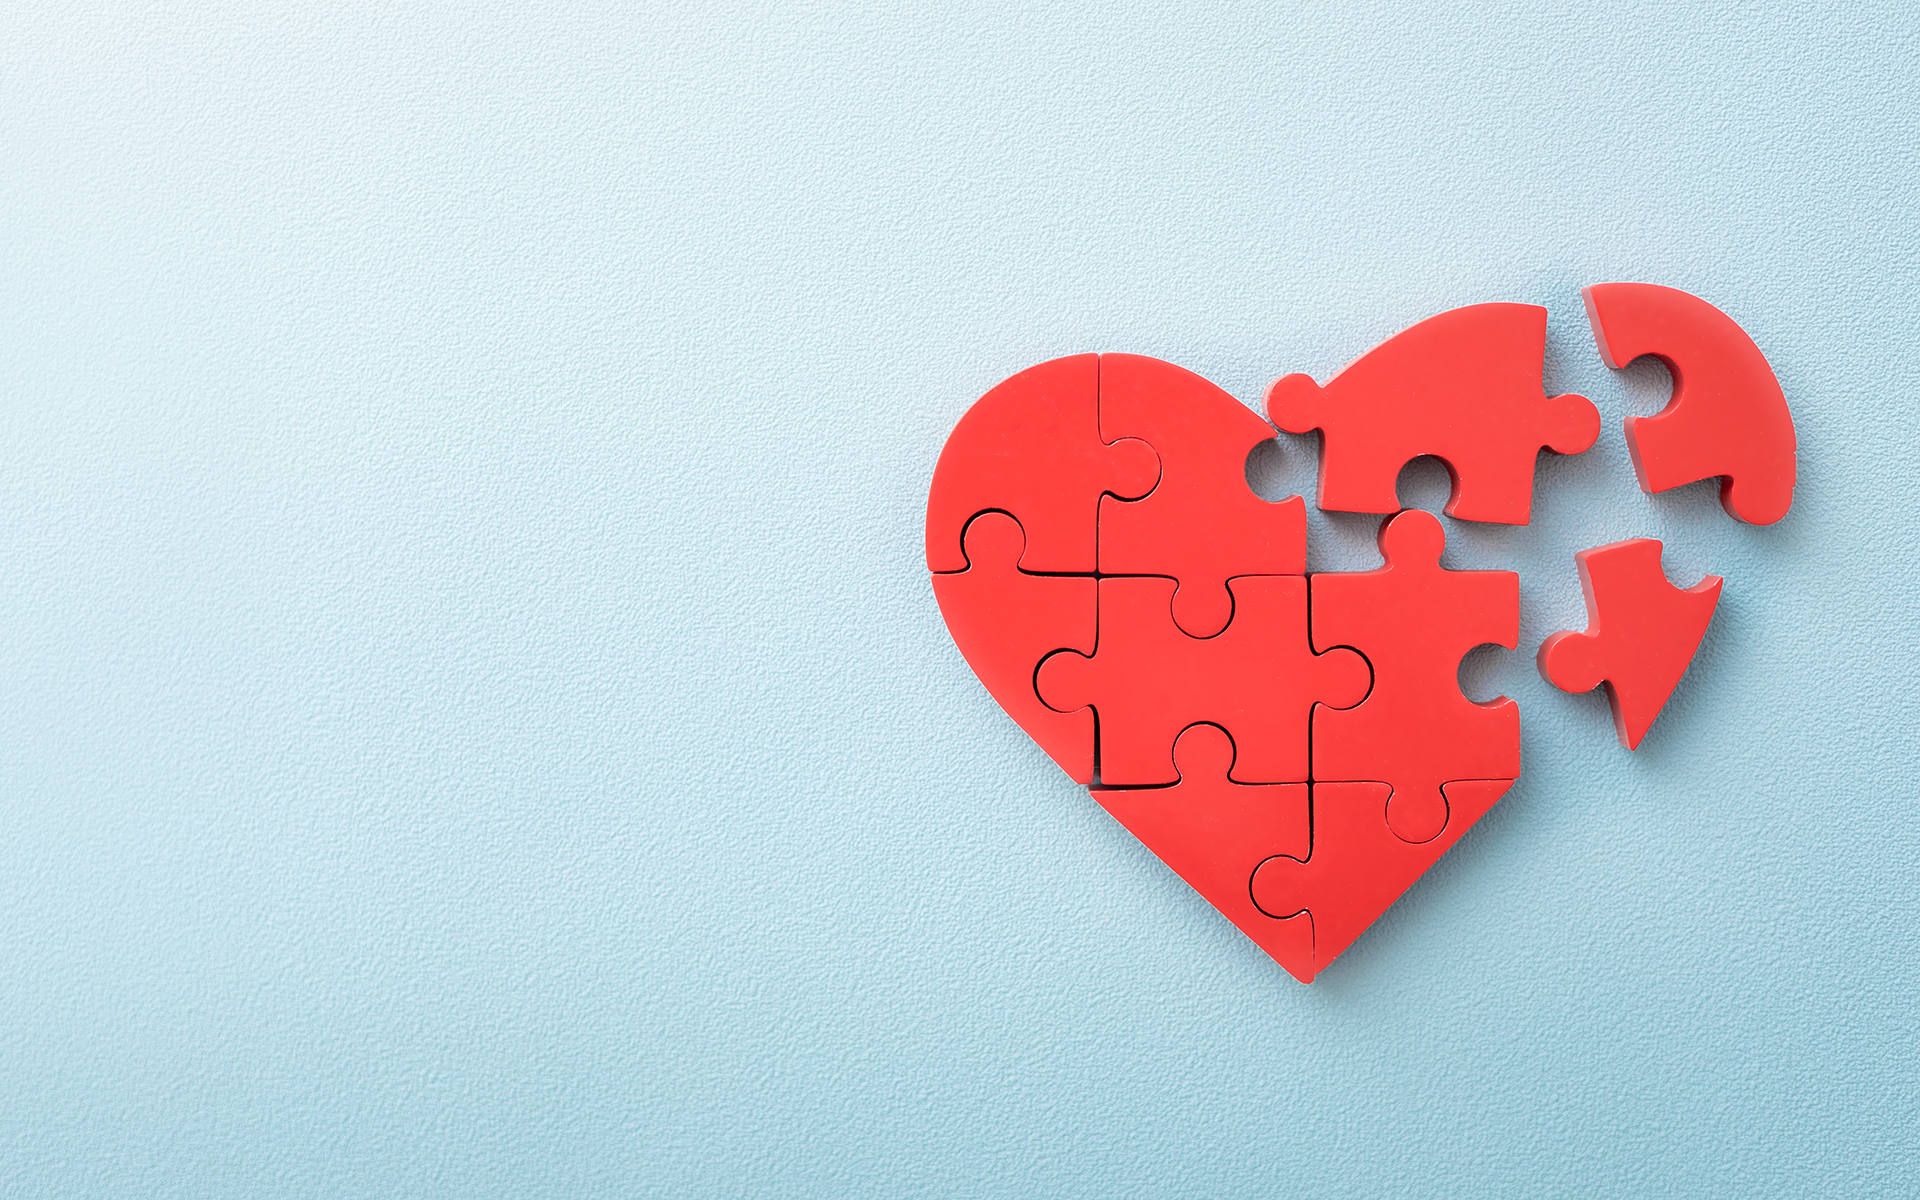 A 12-Minute Meditation to Foster Compassion—A red puzzle fits together in the shape of a heart on a plain light blue background.